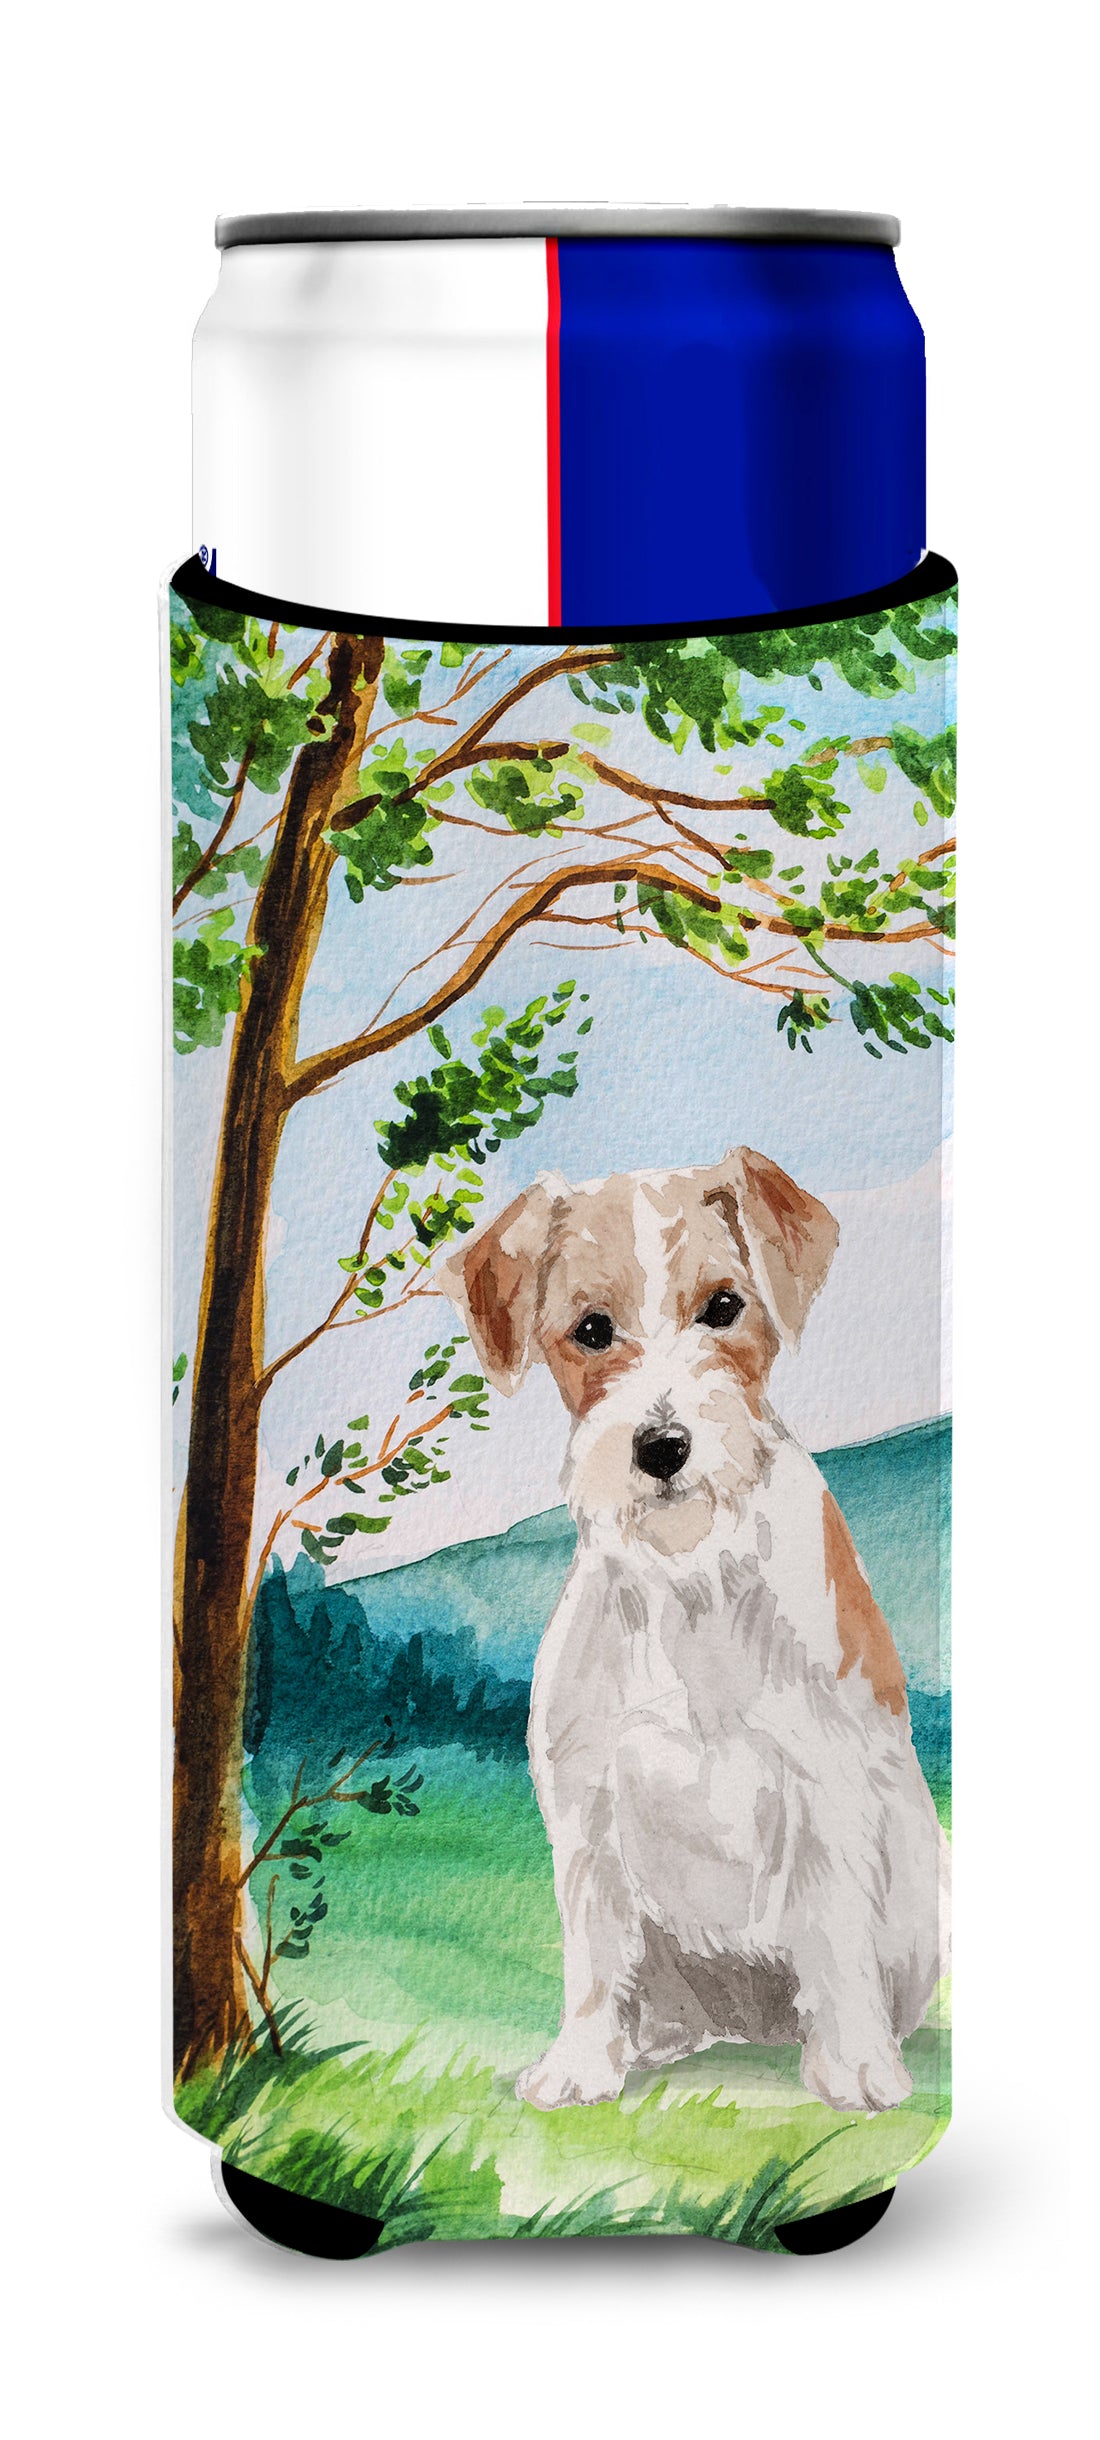 Under the Tree Jack Russell Terrier  Ultra Hugger for slim cans CK1998MUK